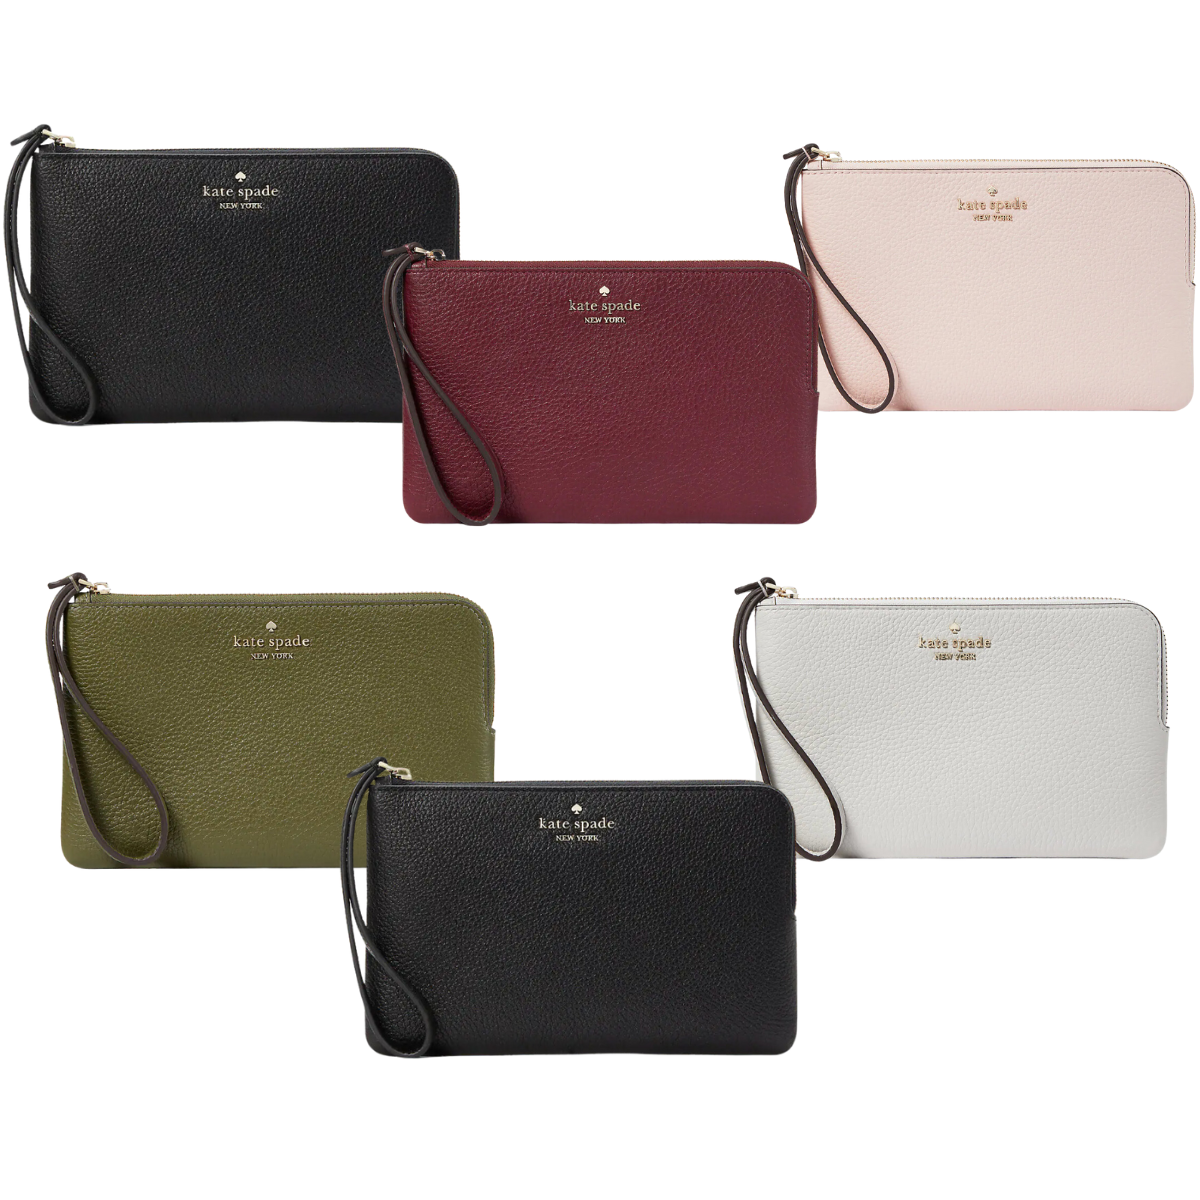 Kate Spade 24-Hour Deal: Get a $139 Wristlet for Just $29